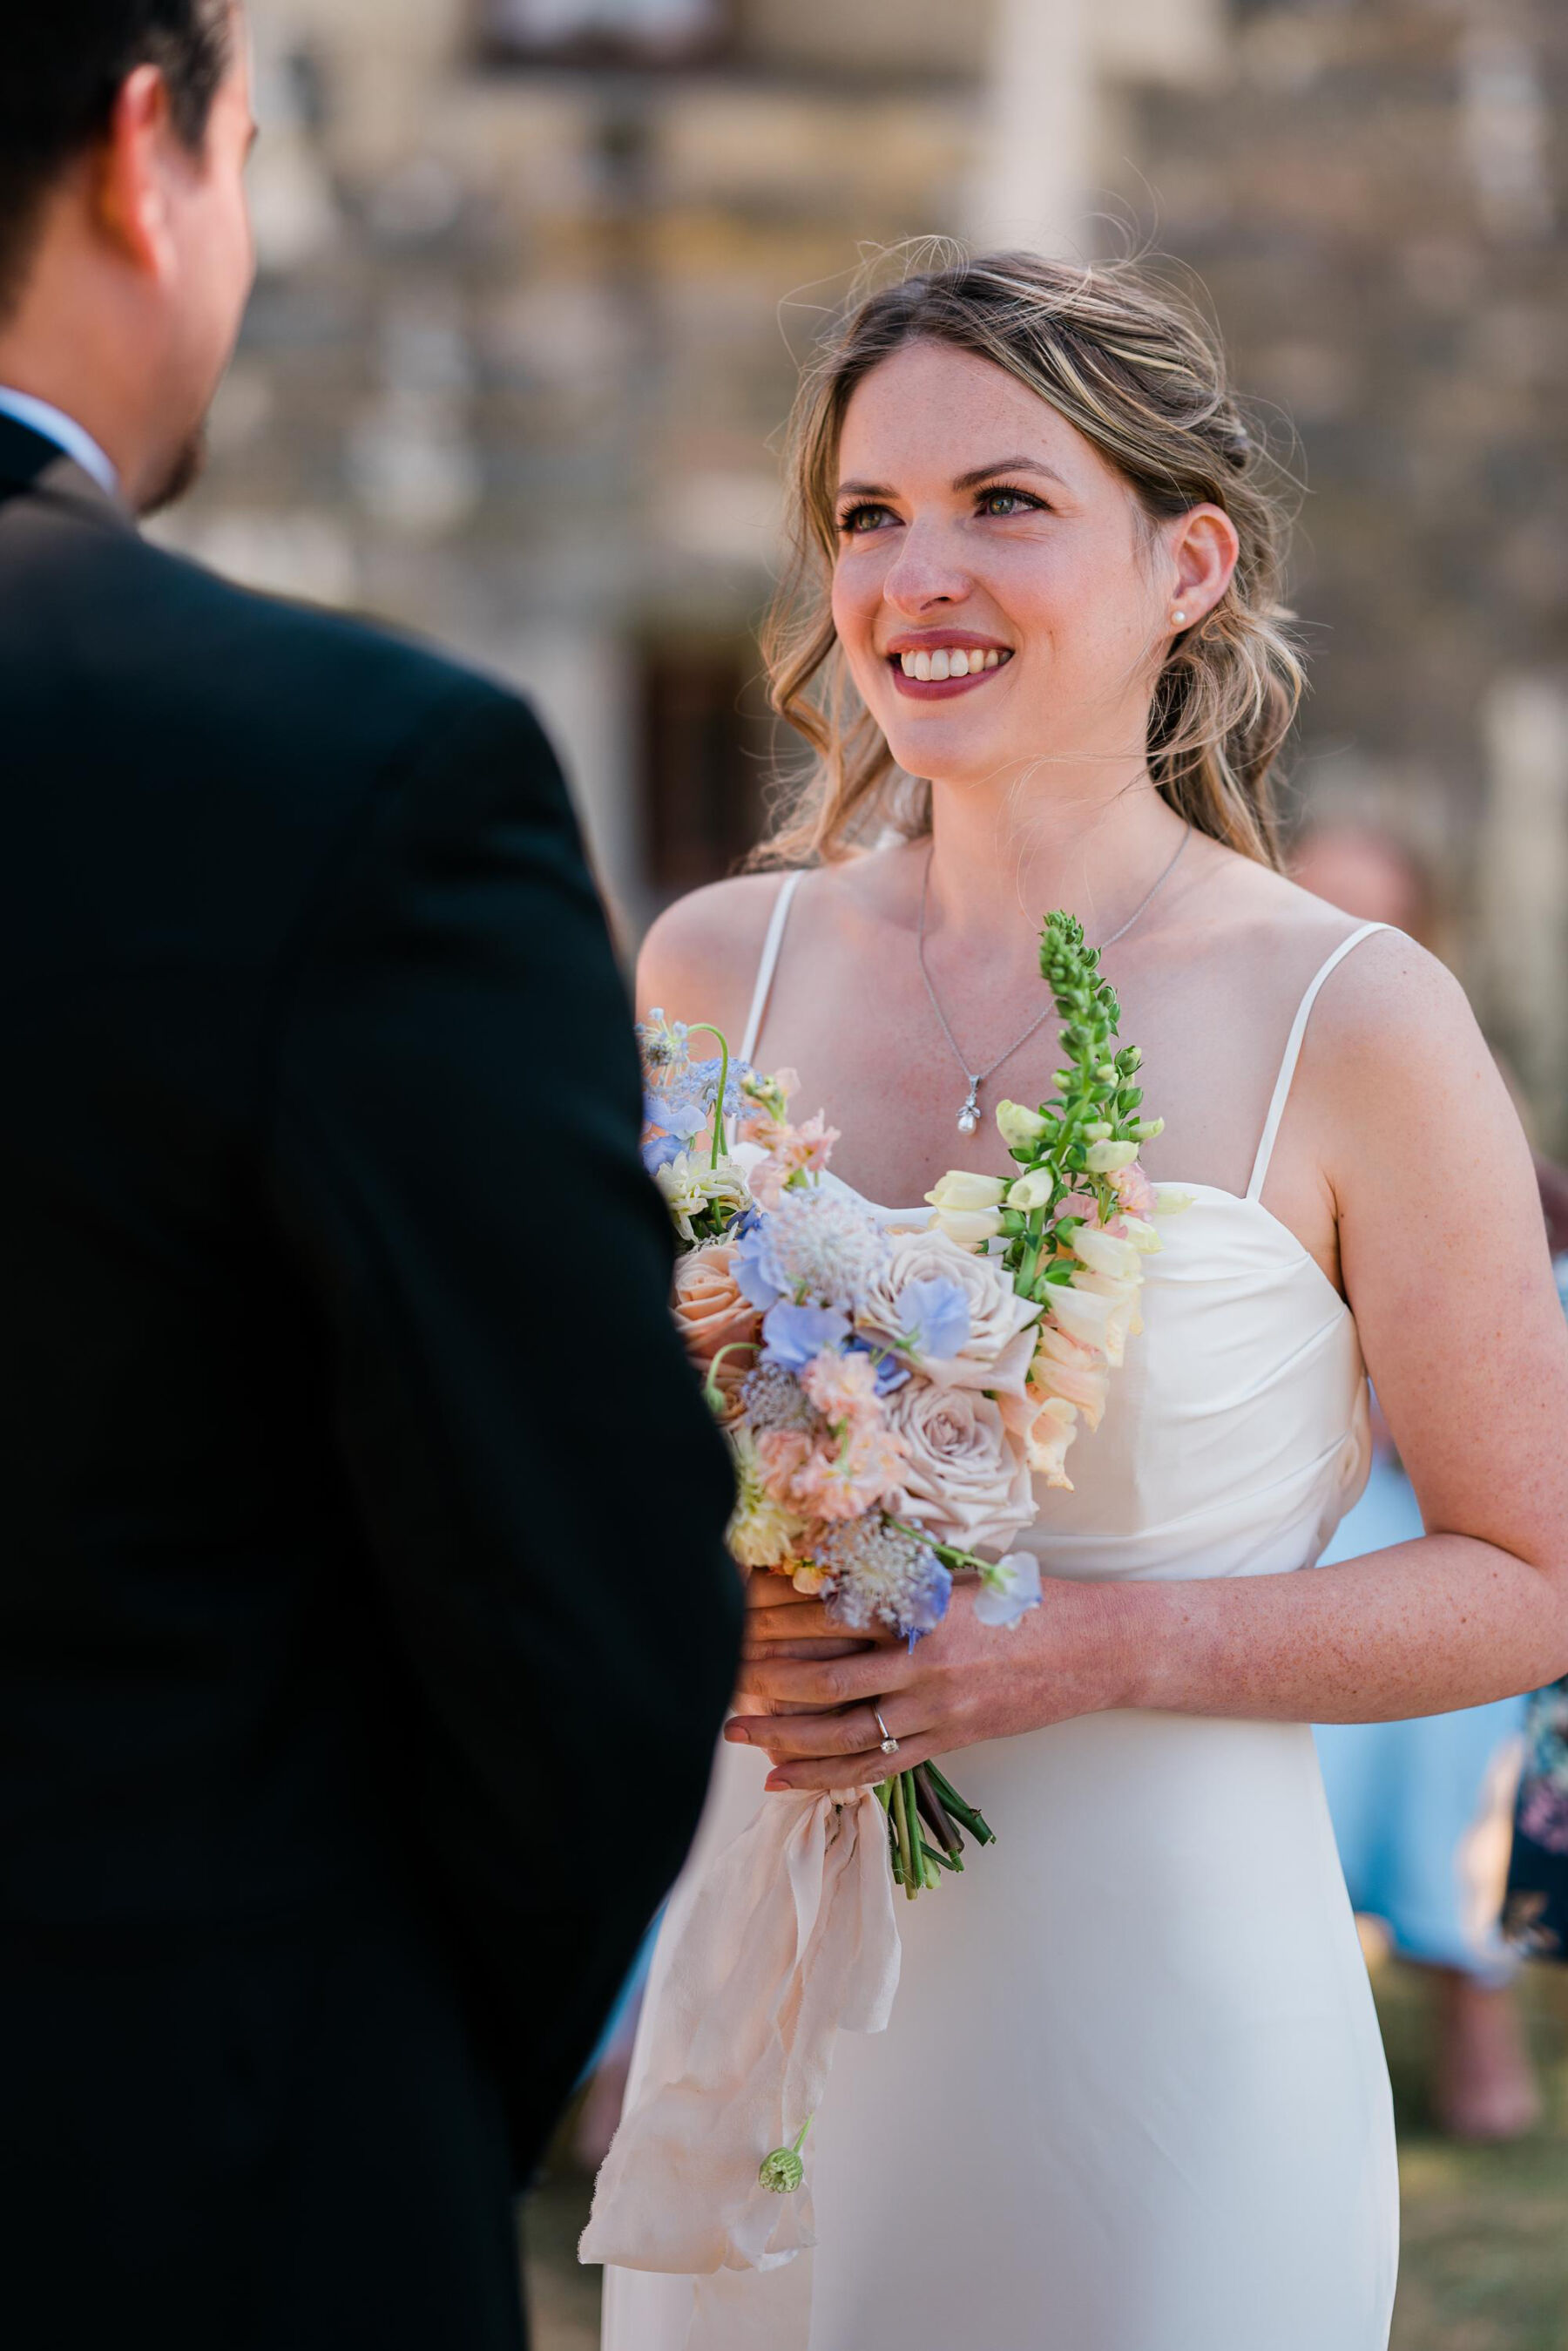 Bride looking lovingly into her groom's eyes during outdoor ceremony